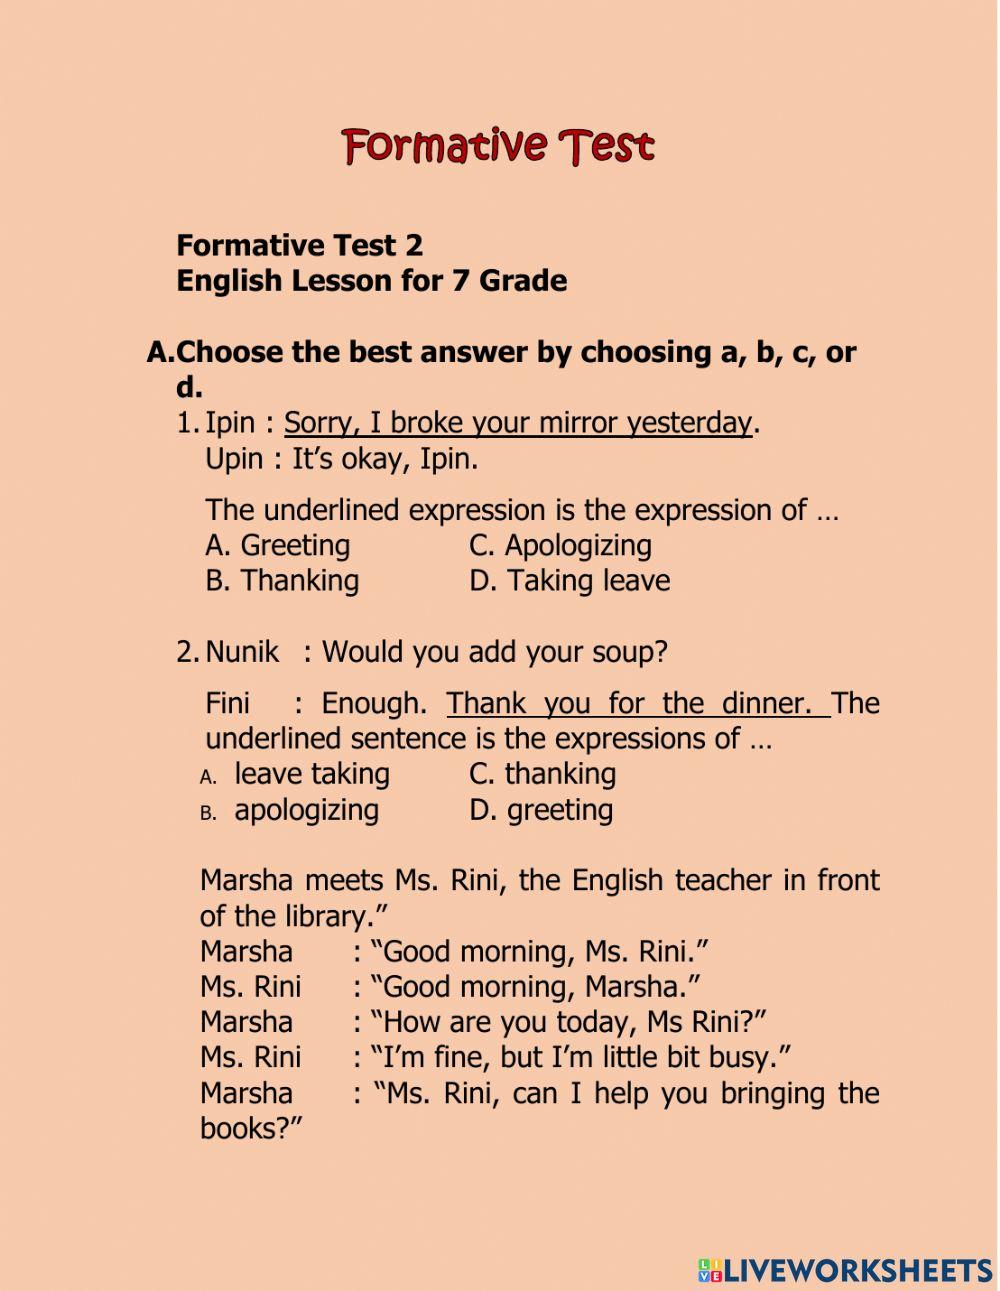 Formative Test 2